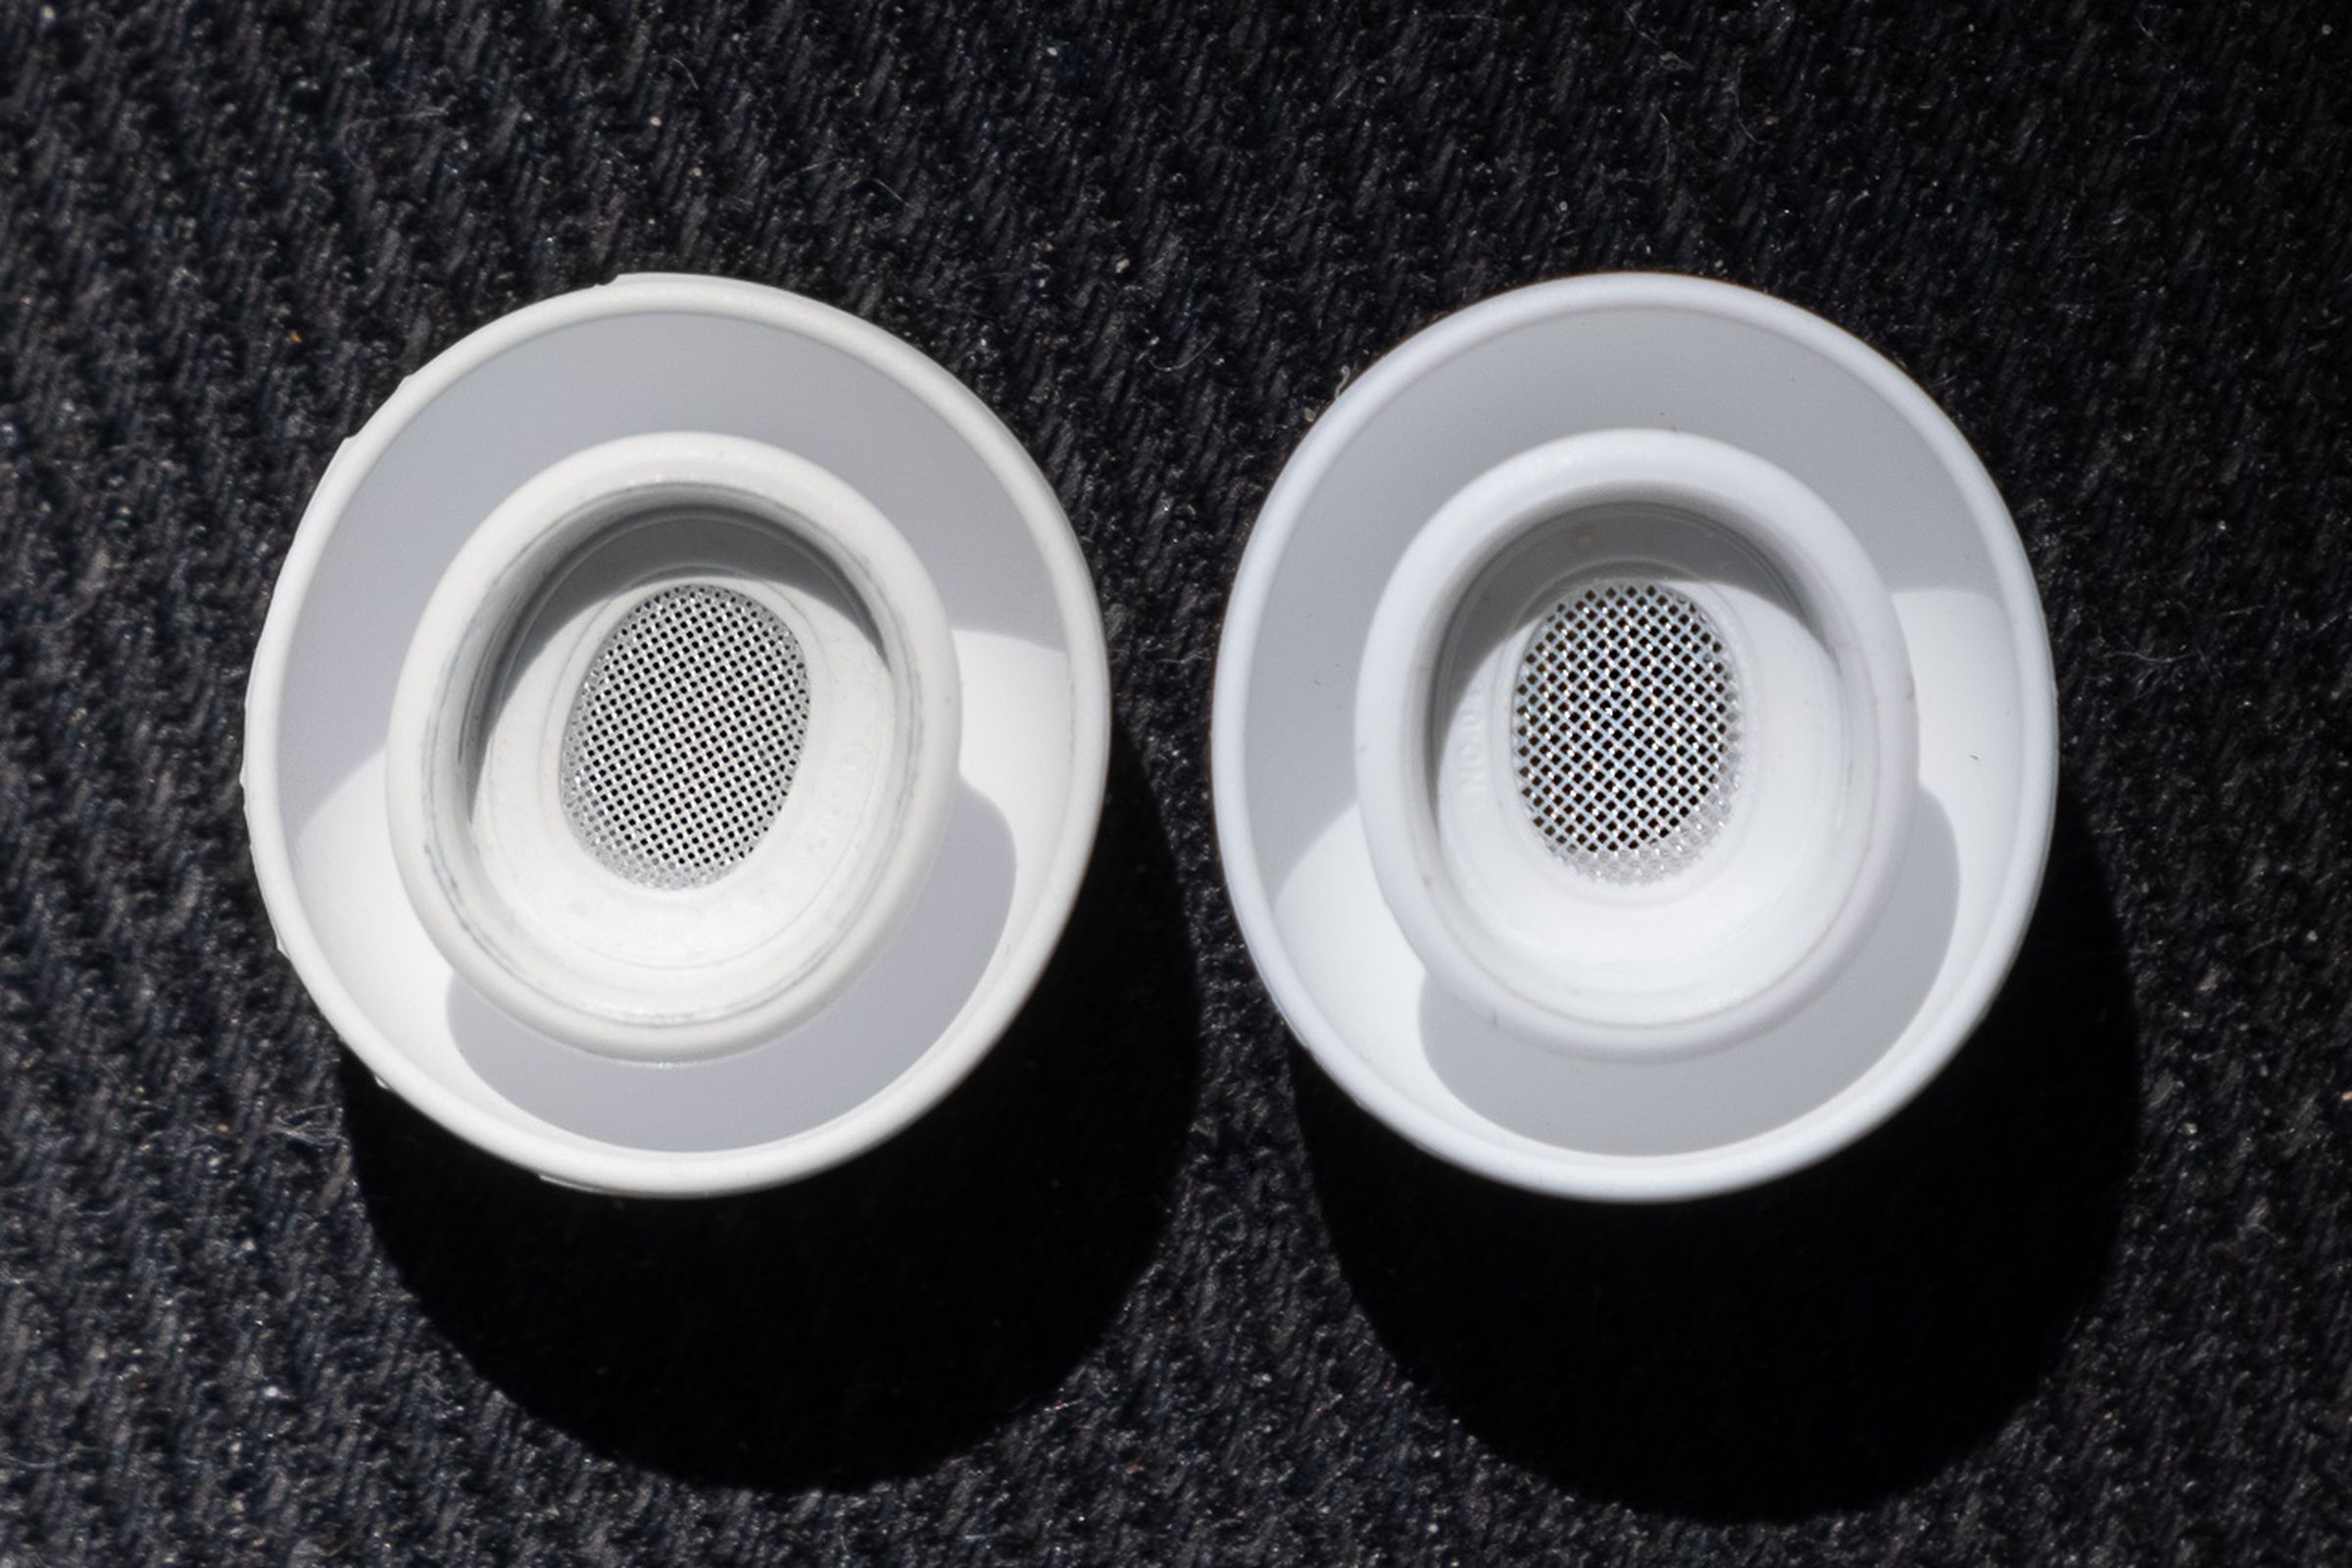 A close-up image comparing the ear tips of Apple’s original AirPods Pro and the second-generation model released in 2022.